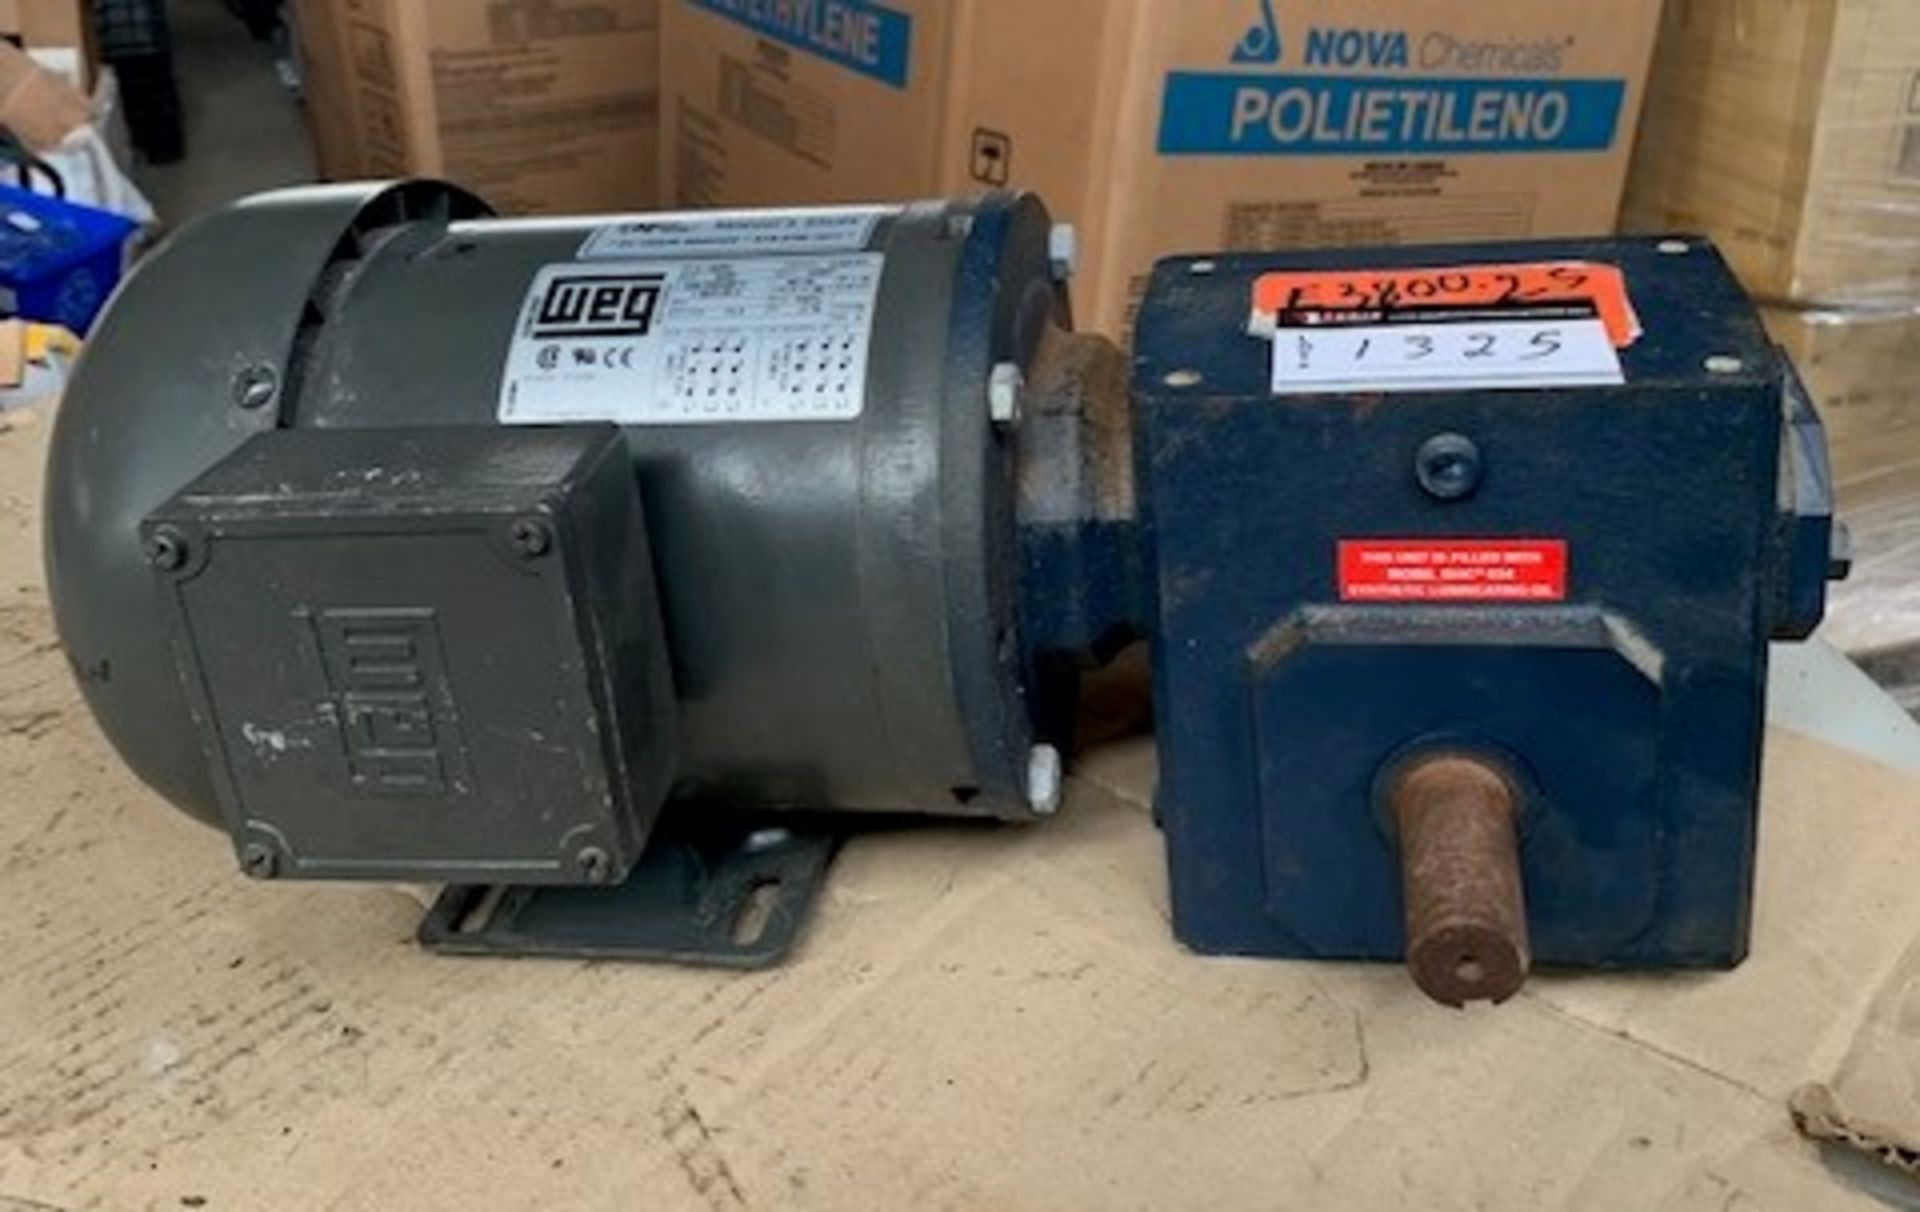 WEG ELECTRIC MOTOR, VOLTS 208-230/460, RPM 1725, 3 PHASE, HP 5/8 - Image 4 of 8